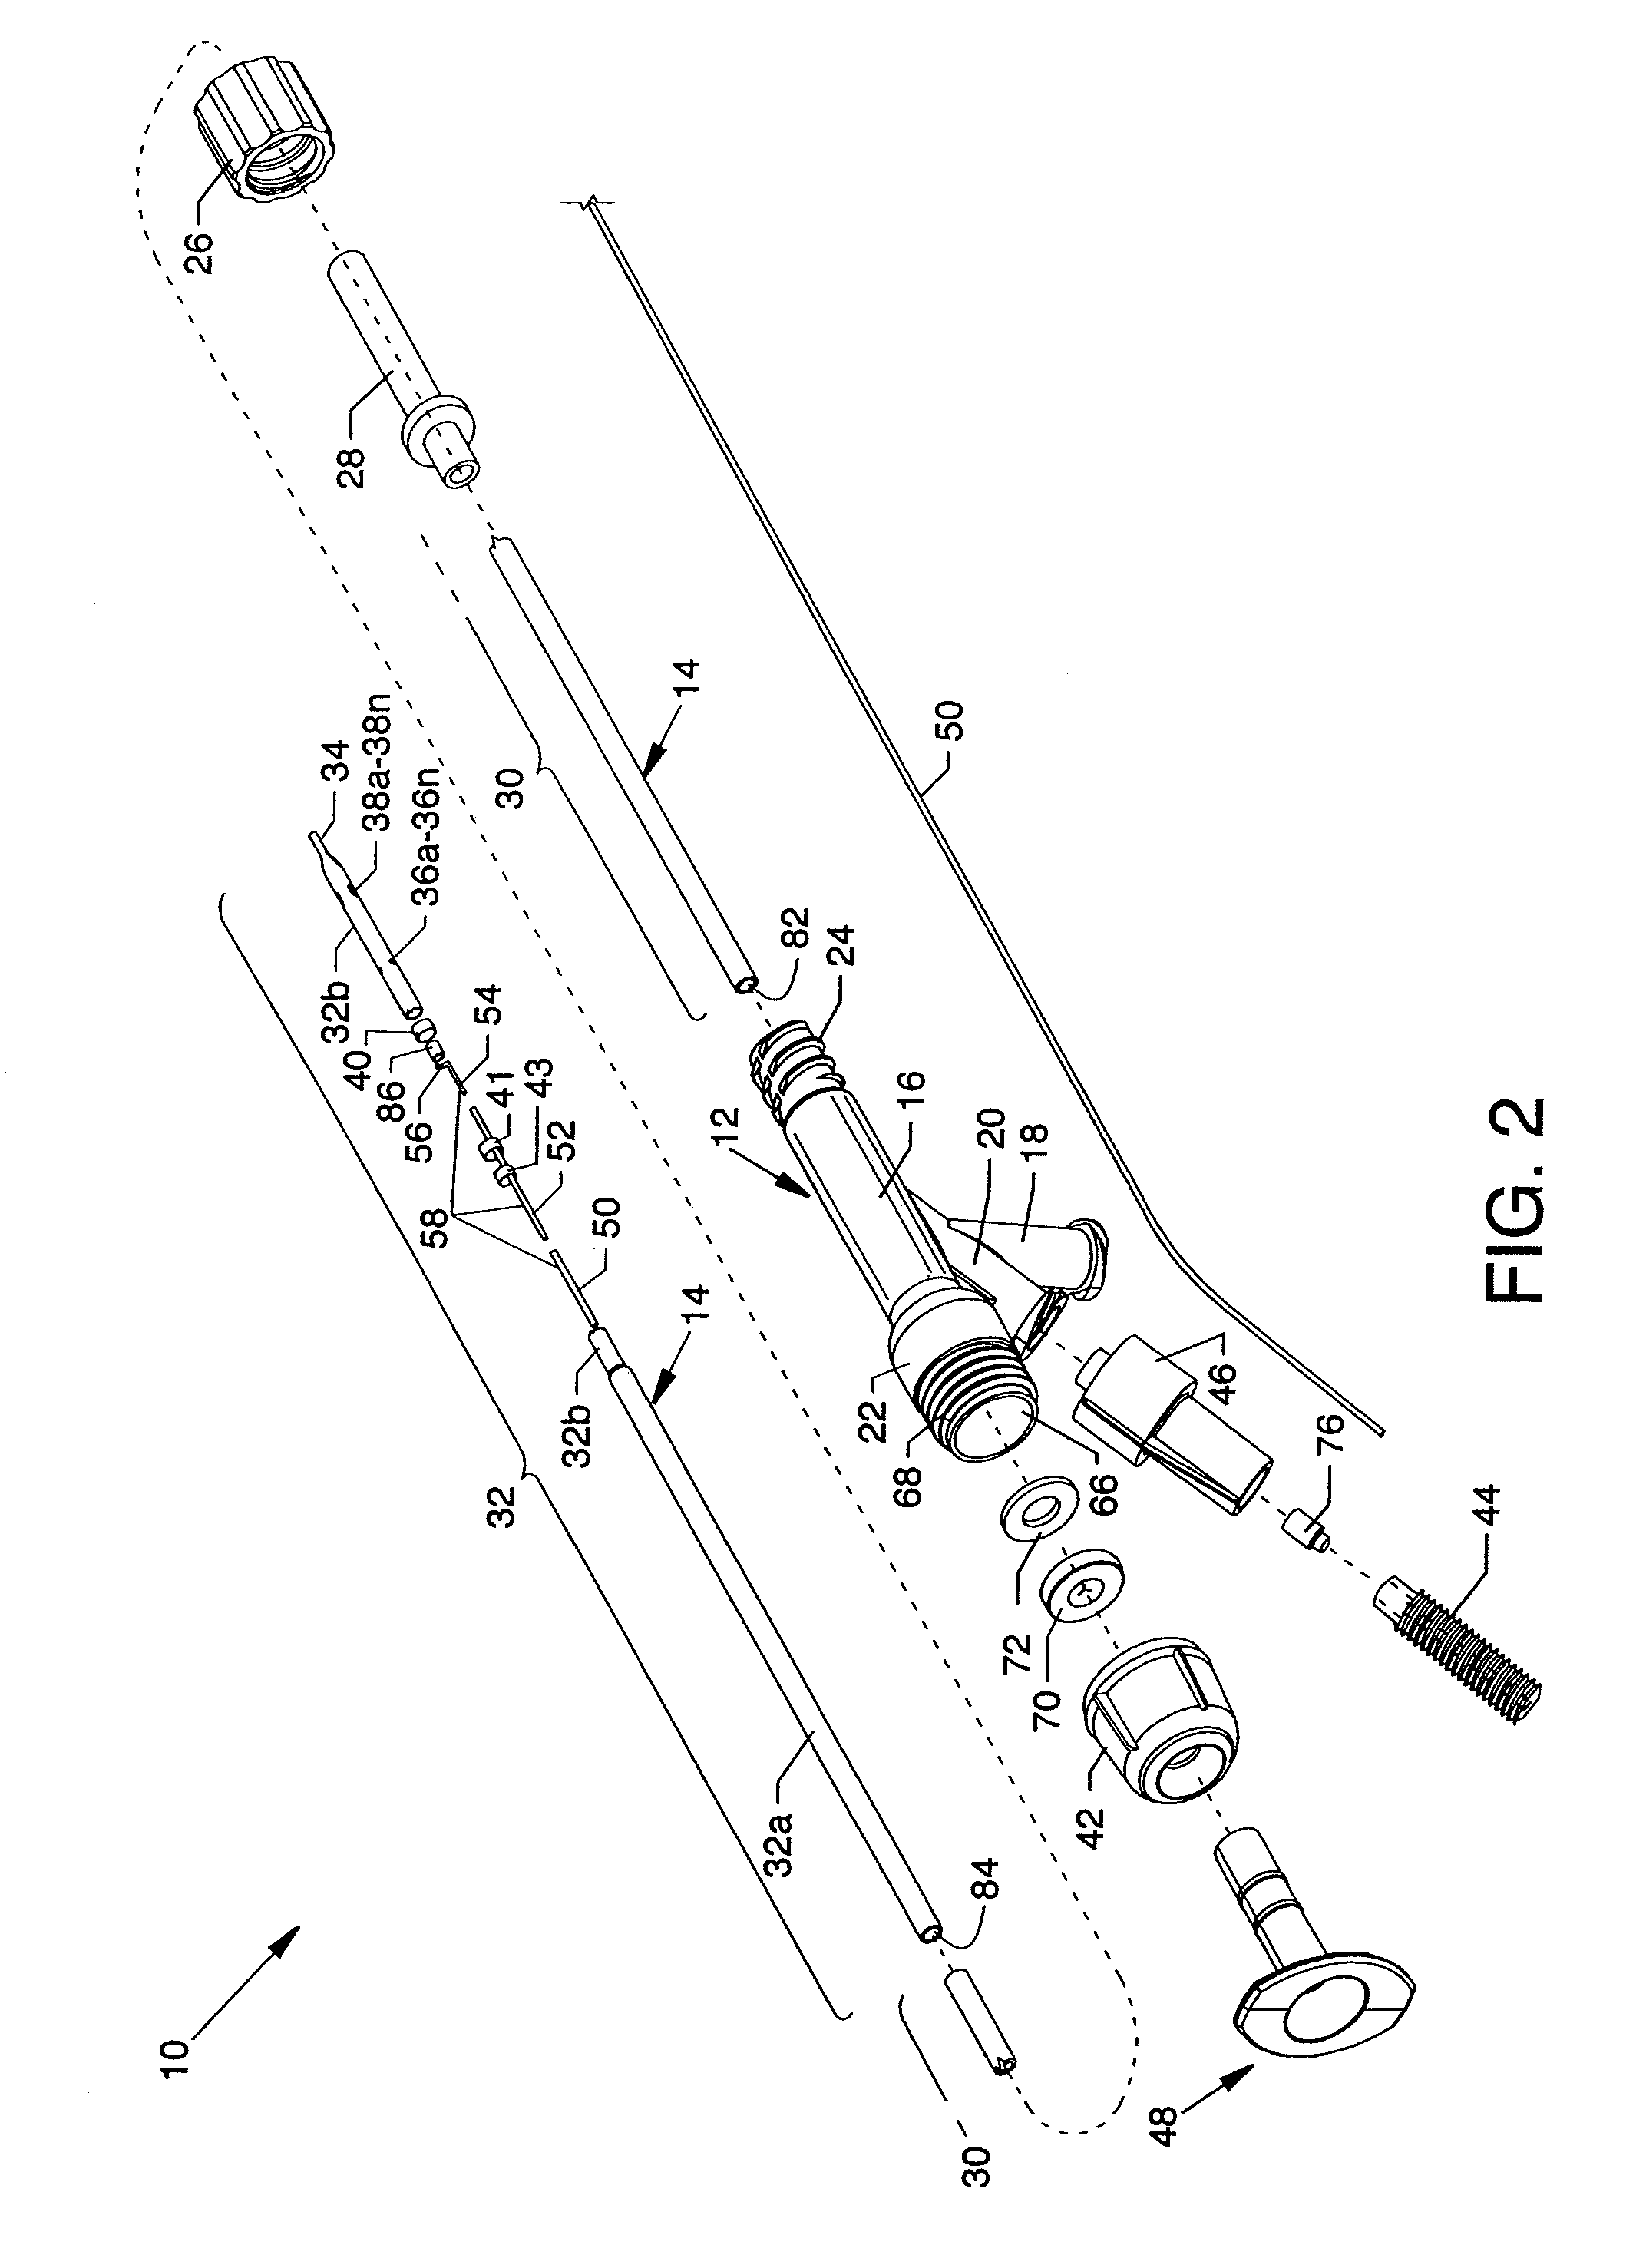 Method of manufacturing a miniature flexible thrombectomy catheter